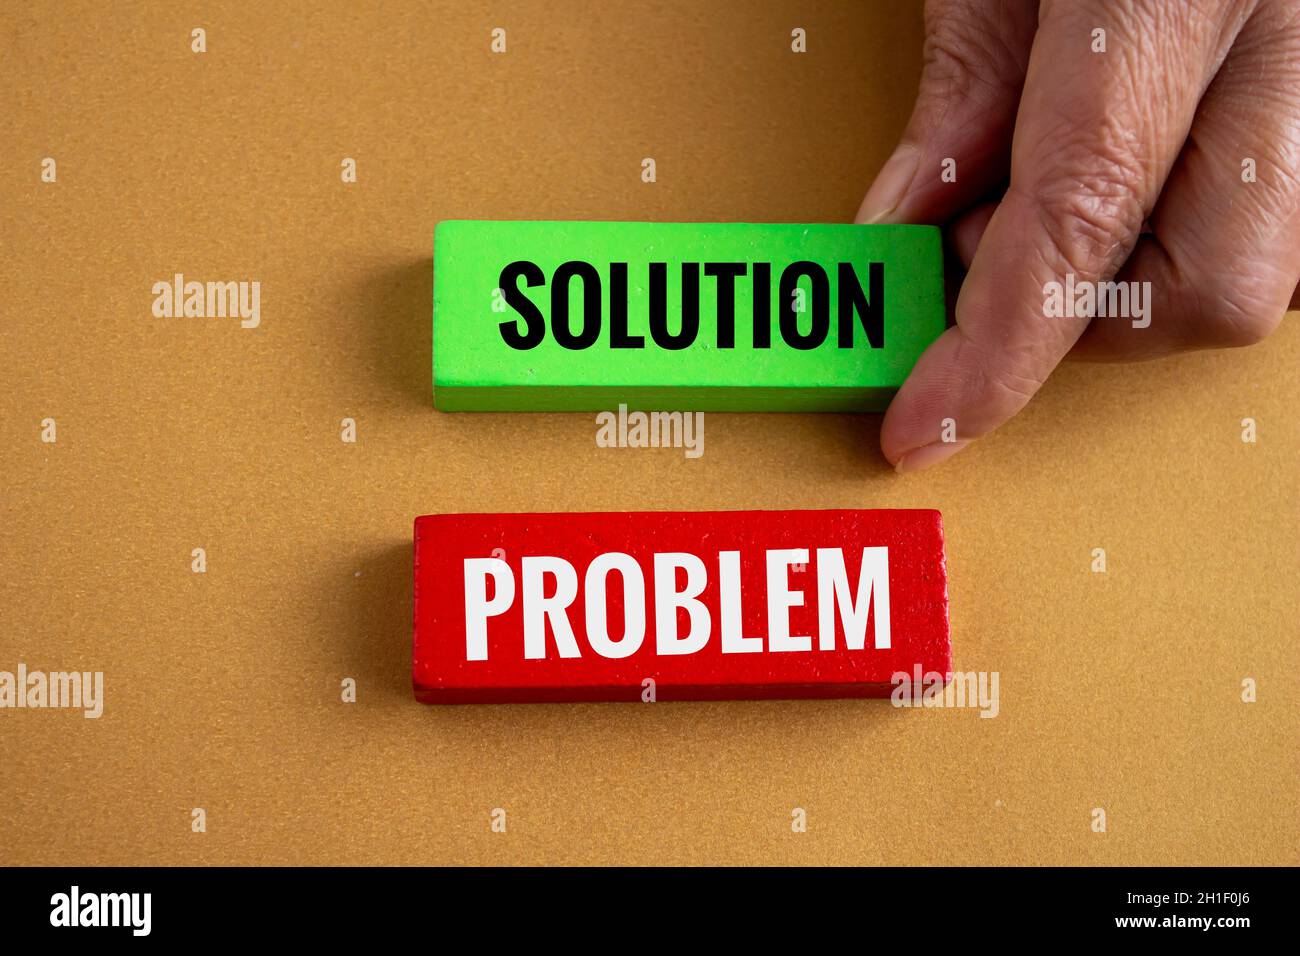 Hand holding wooden blocks with problem and solution written on it. Concept of solving problems. Stock Photo